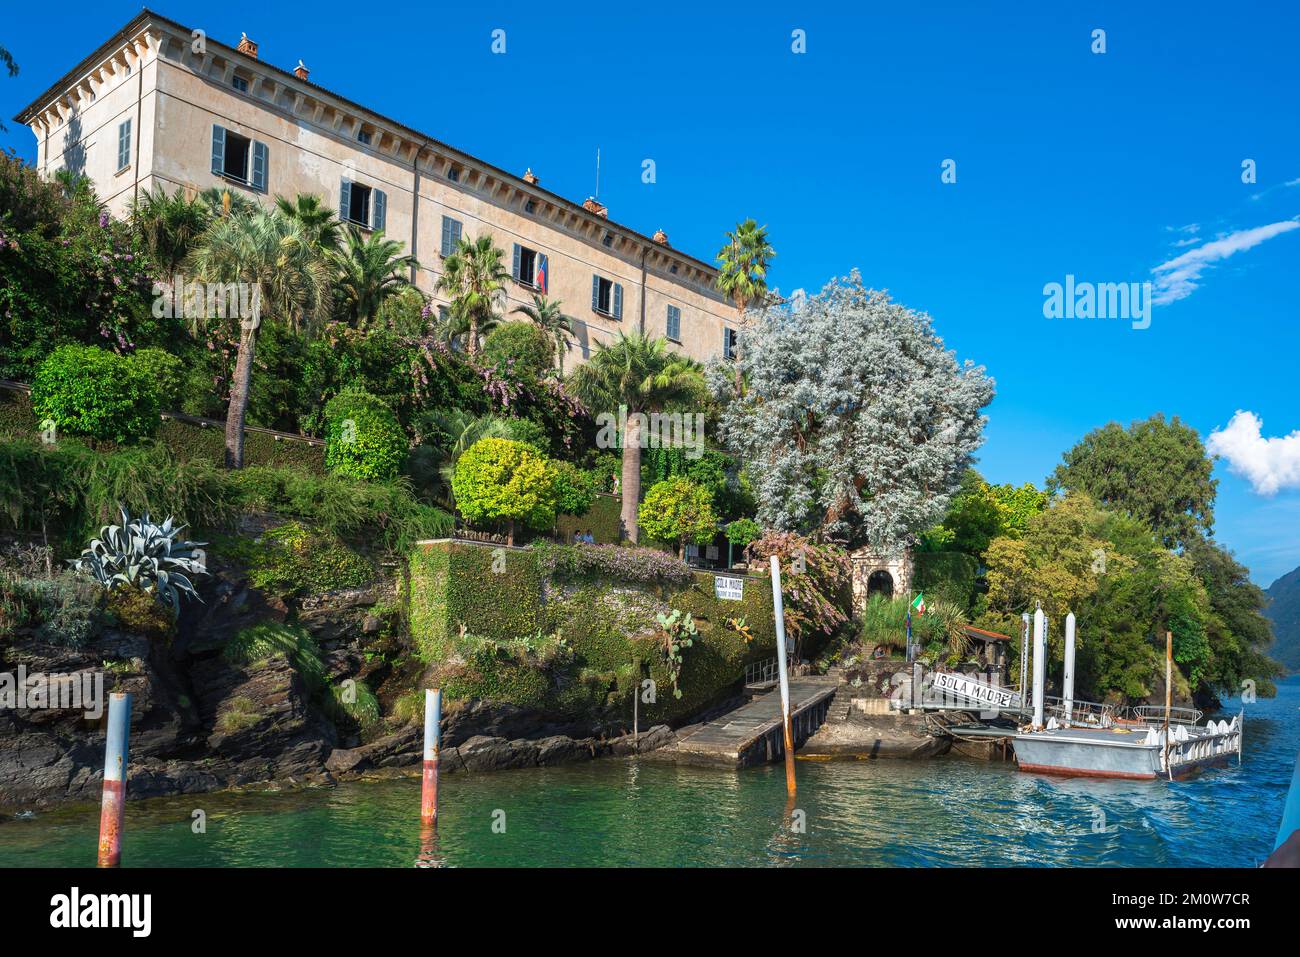 Isola Madre Italy, view in summer of the ferry landing stage below the Palazzo dell Isola Madre, Borromeo Islands, Lake Maggiore, Piedmont Stock Photo